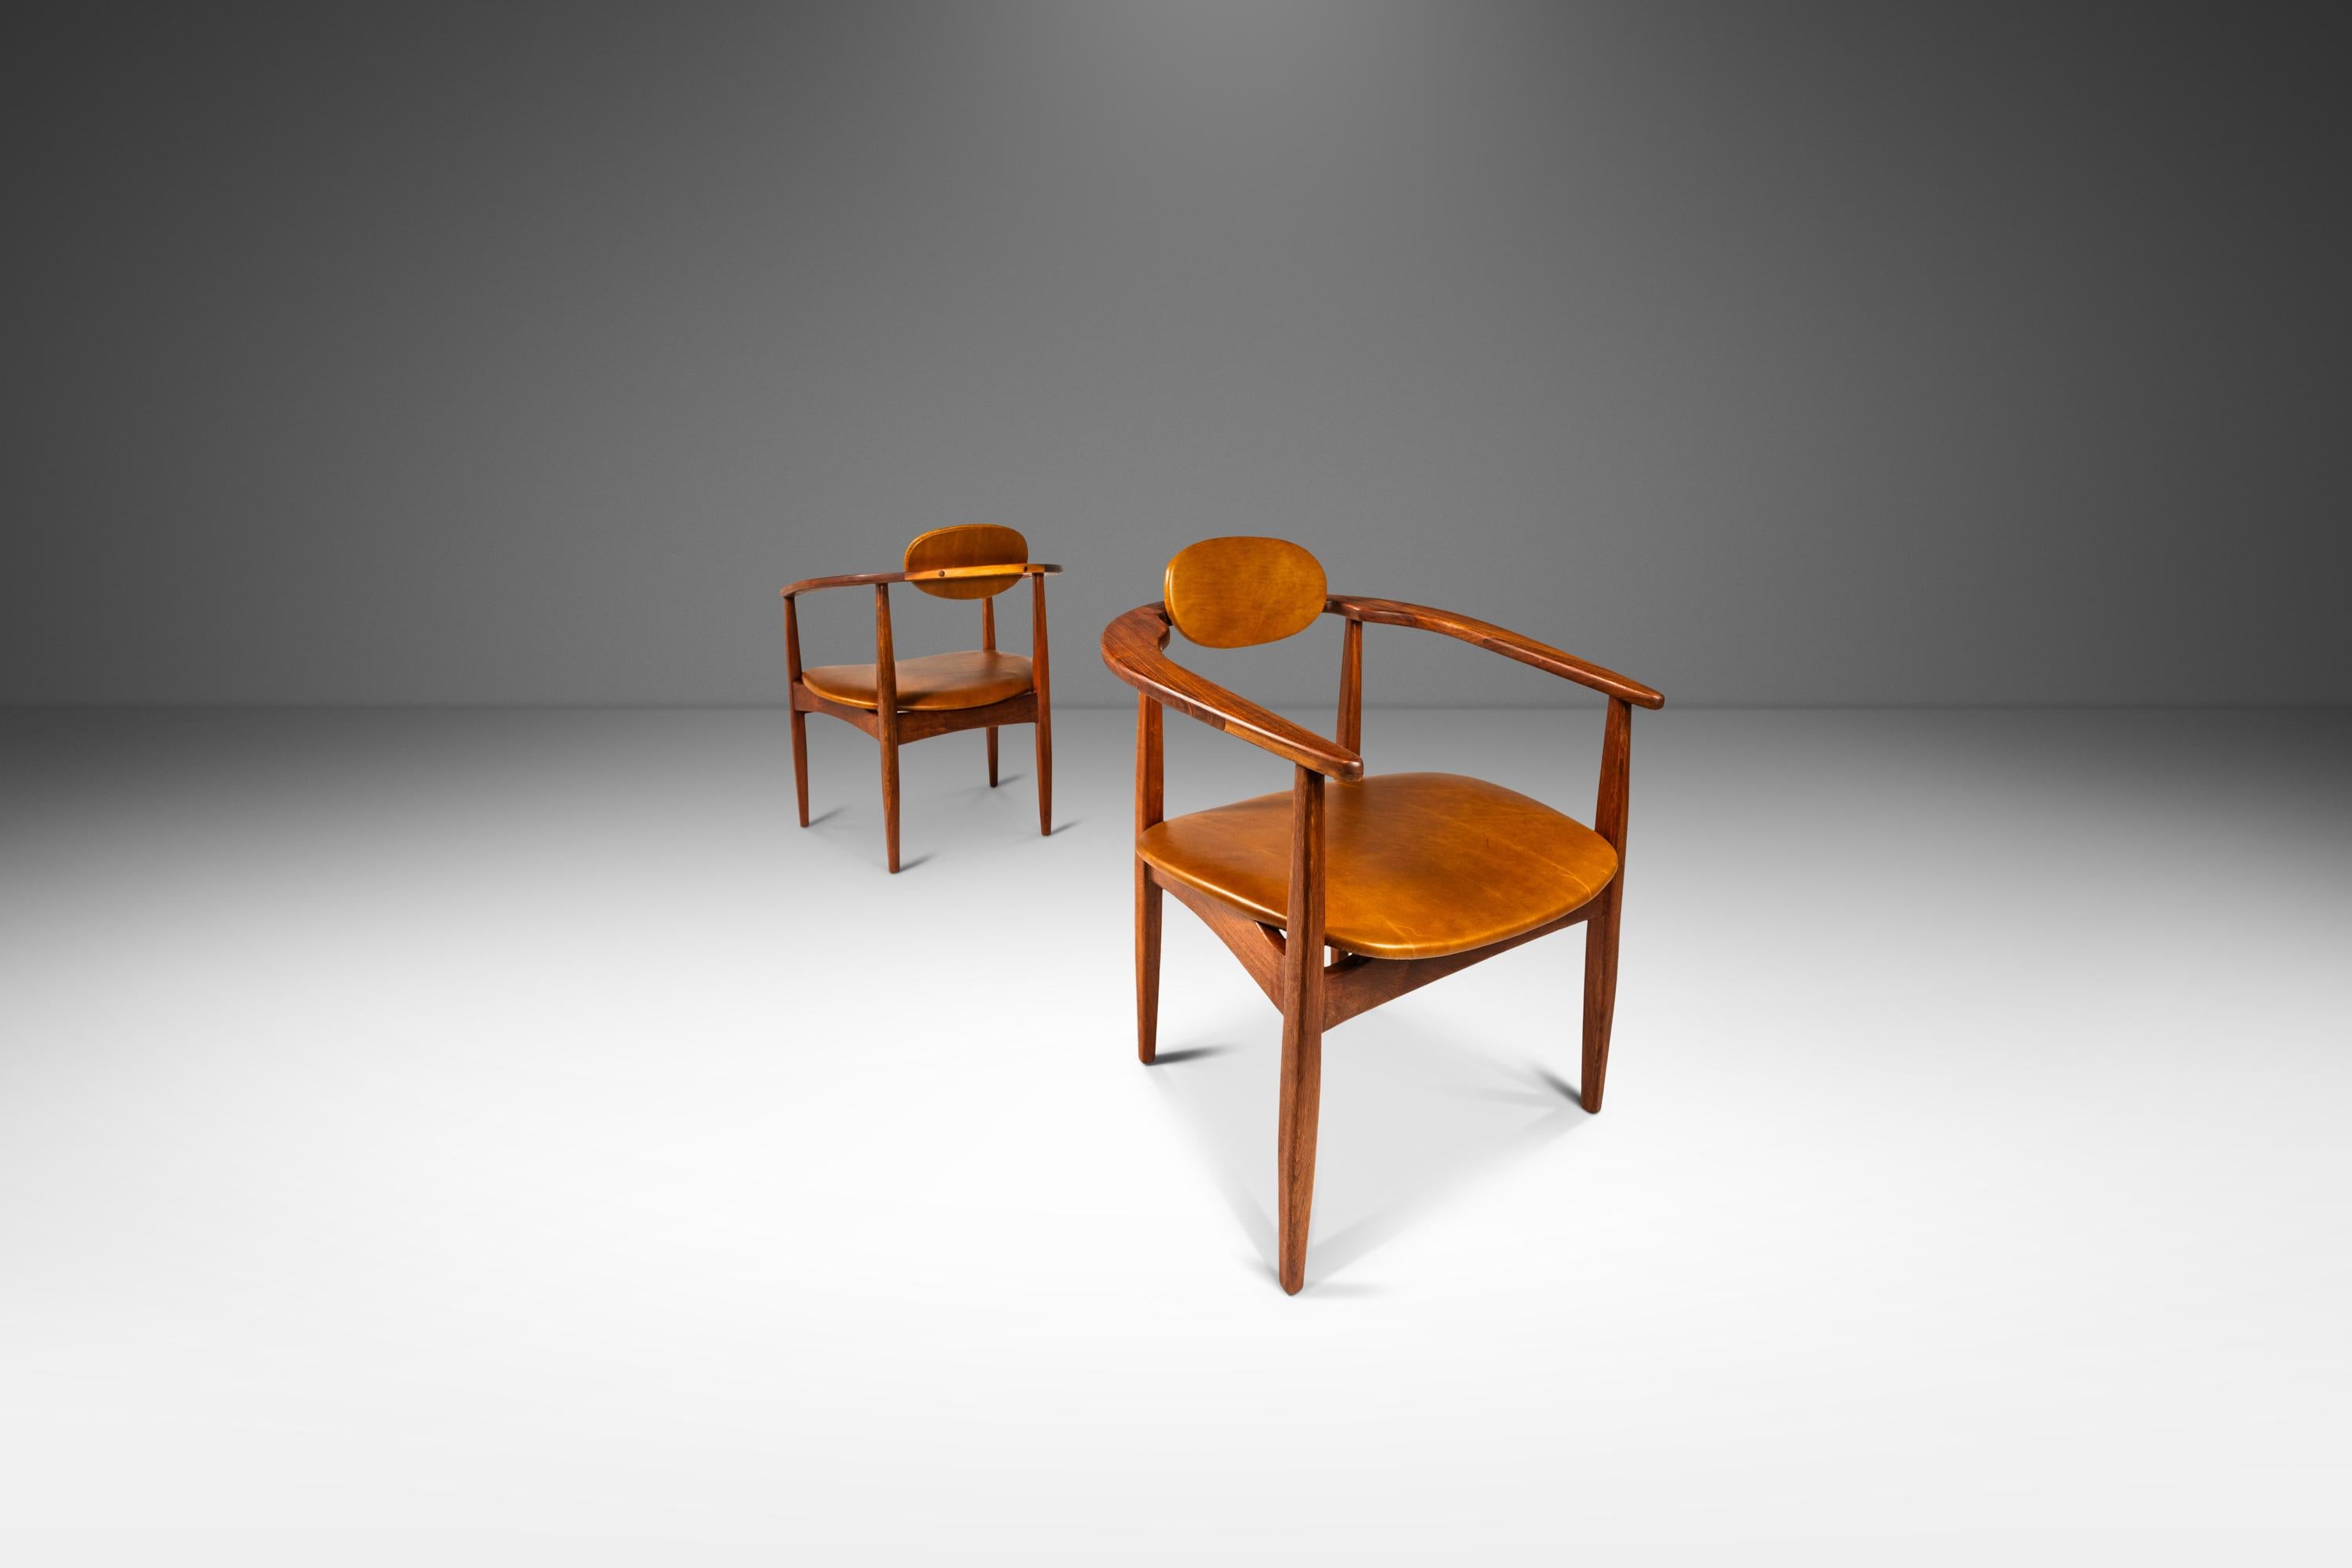 Set of 2 Sculptural Lounge Chairs, Leather & Walnut, Adrian Pearsall Style, 1960 For Sale 5